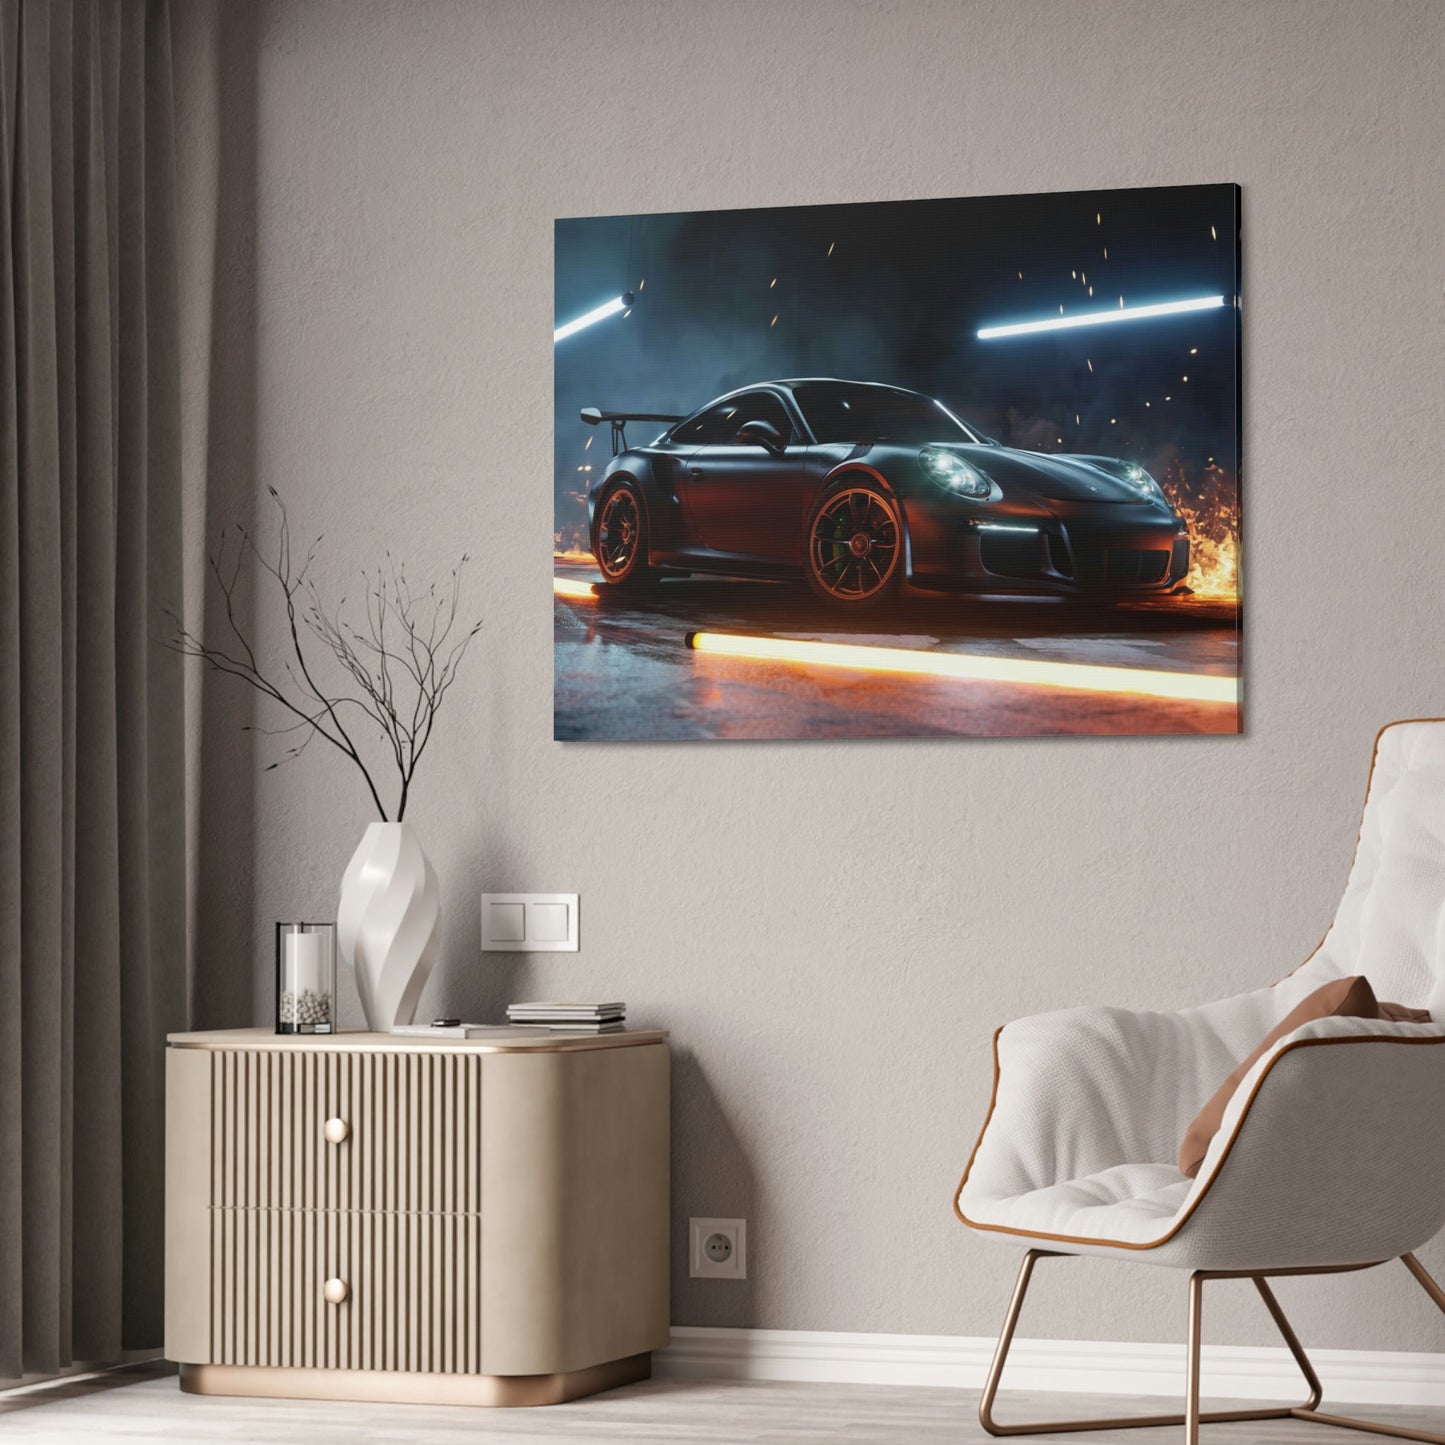 Beauty in Motion: Natural Canvas & Poster Print of a Porsche in Action